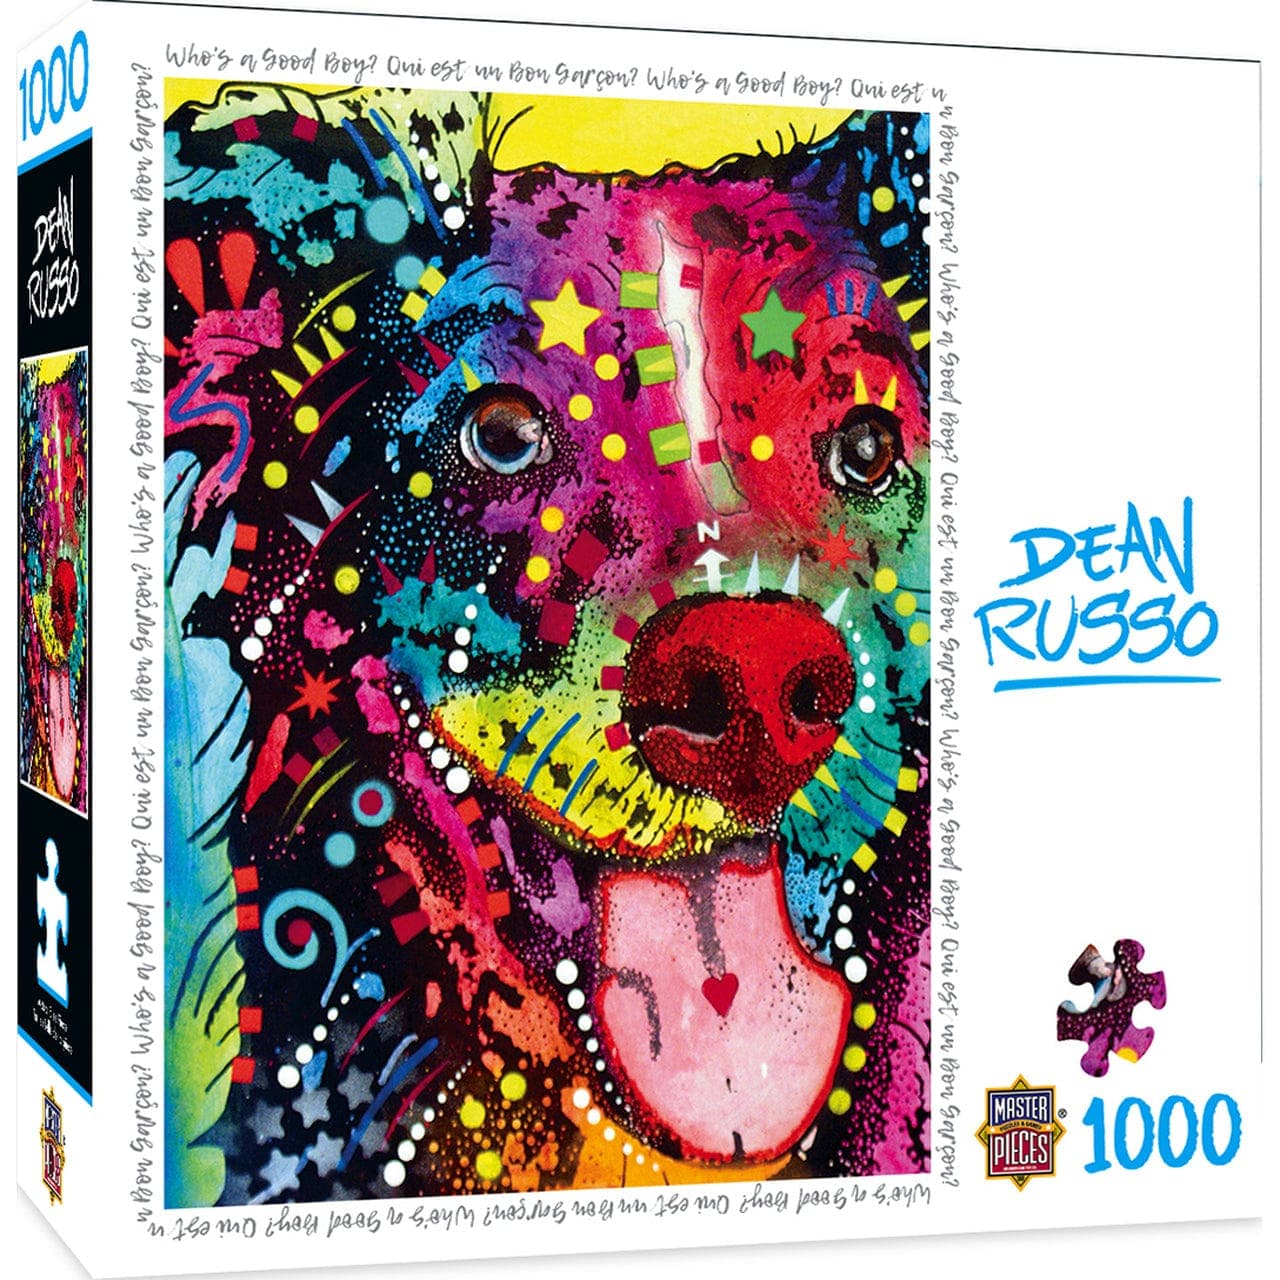 MasterPieces-Dean Russo - Who's a Good Boy? - 1000 Piece Puzzle-71818-Legacy Toys